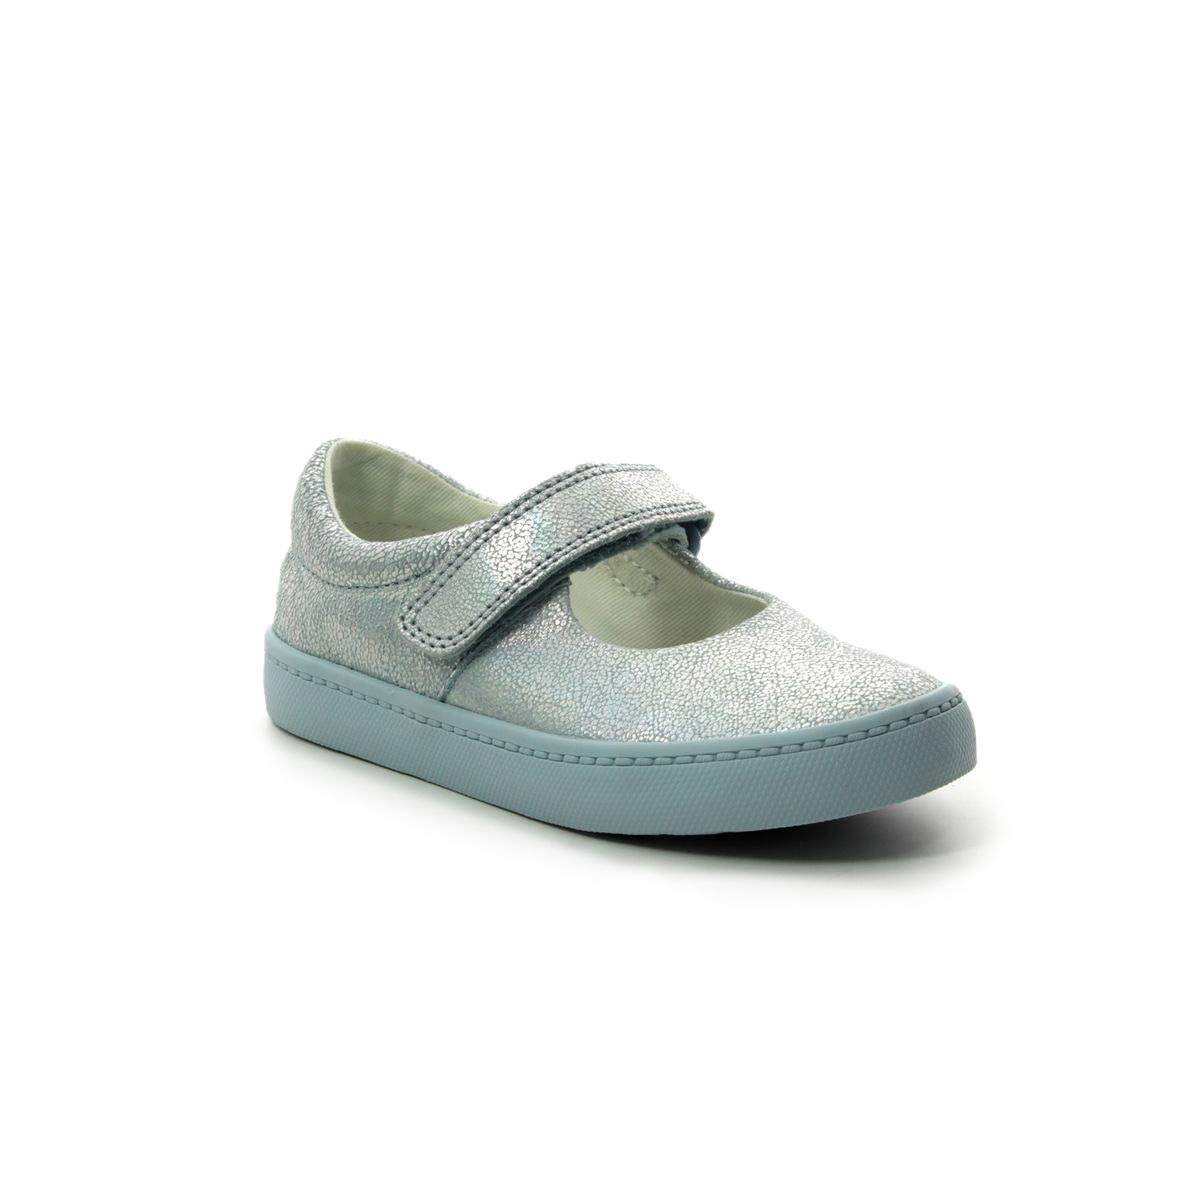 Clarks City Gleam T Blue Kids first shoes 4251-76F